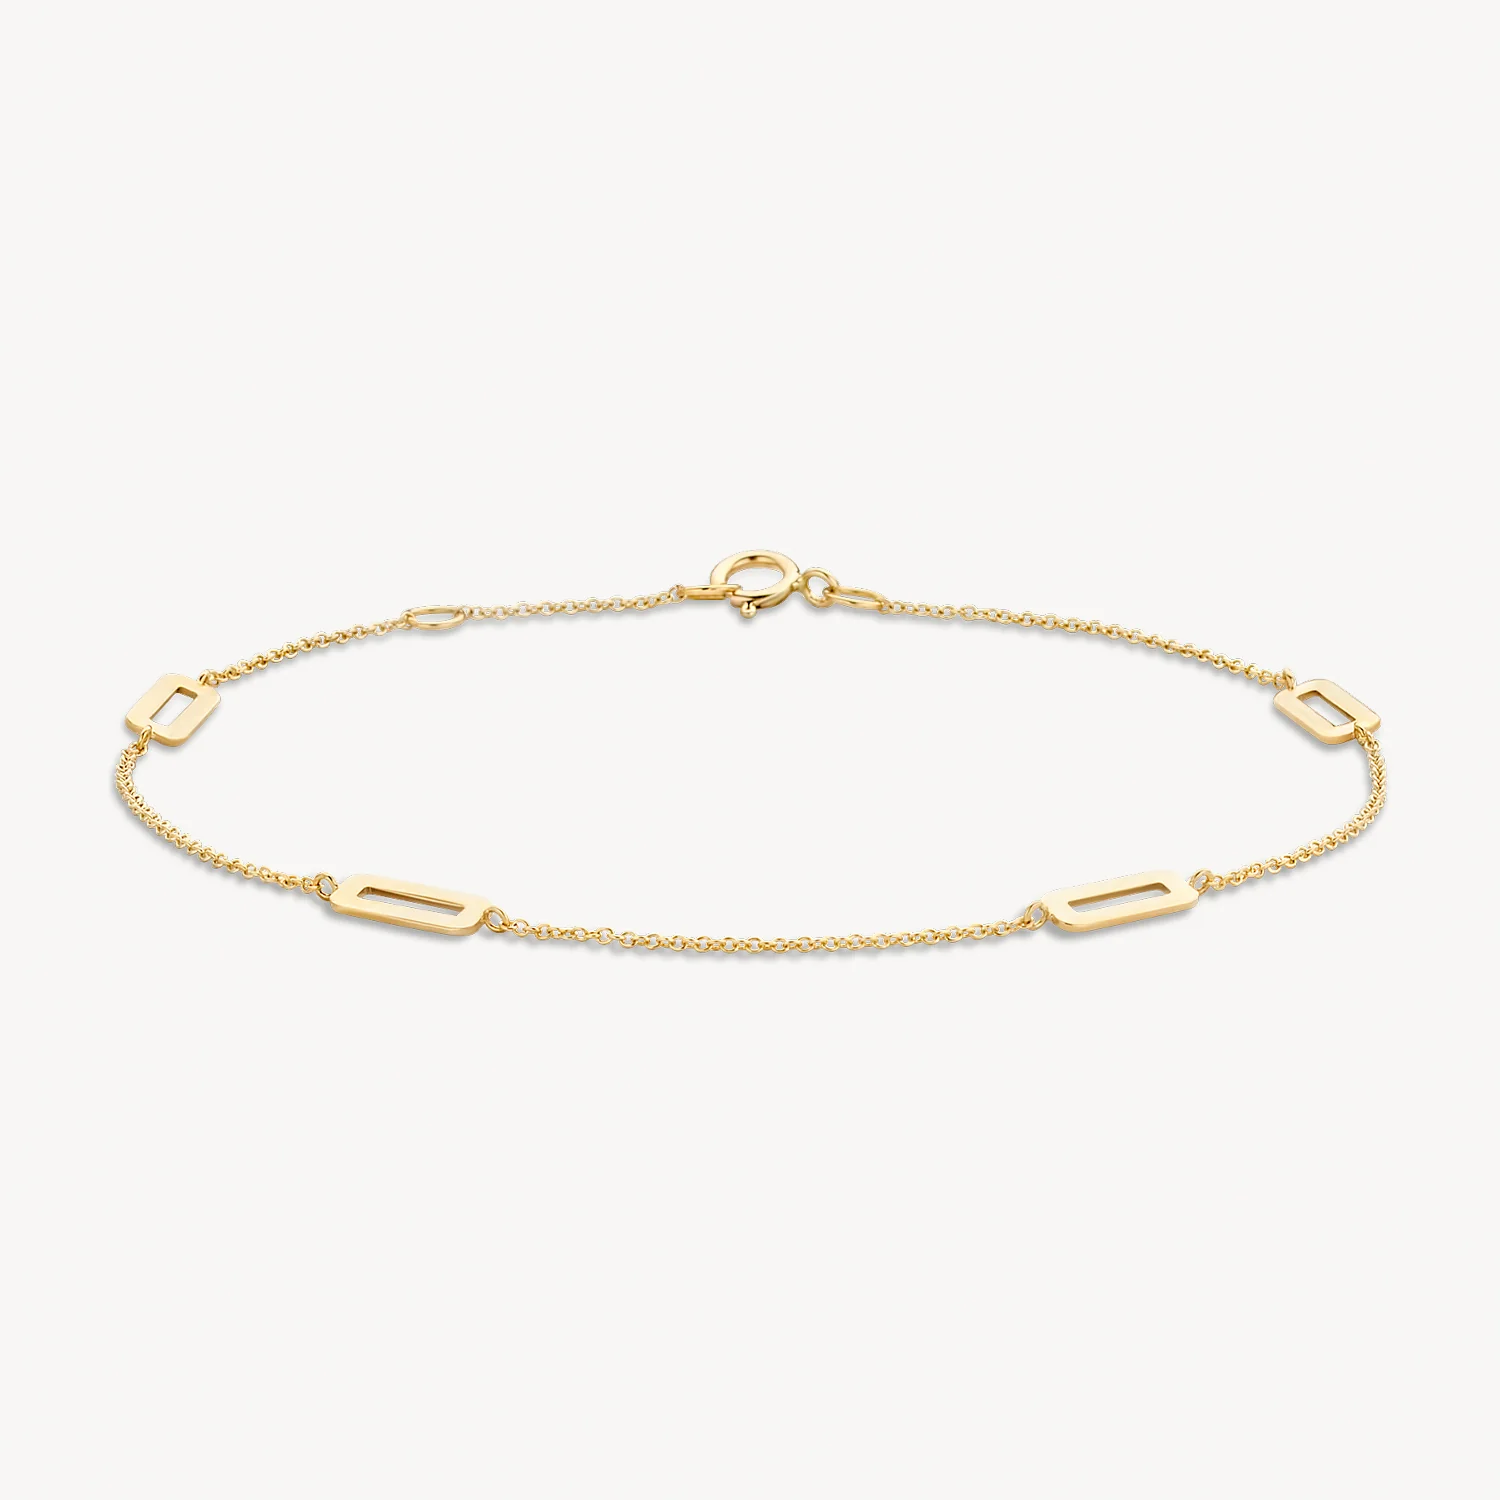 Blush Yellow Gold Chain Bracelet with Open Rectangles